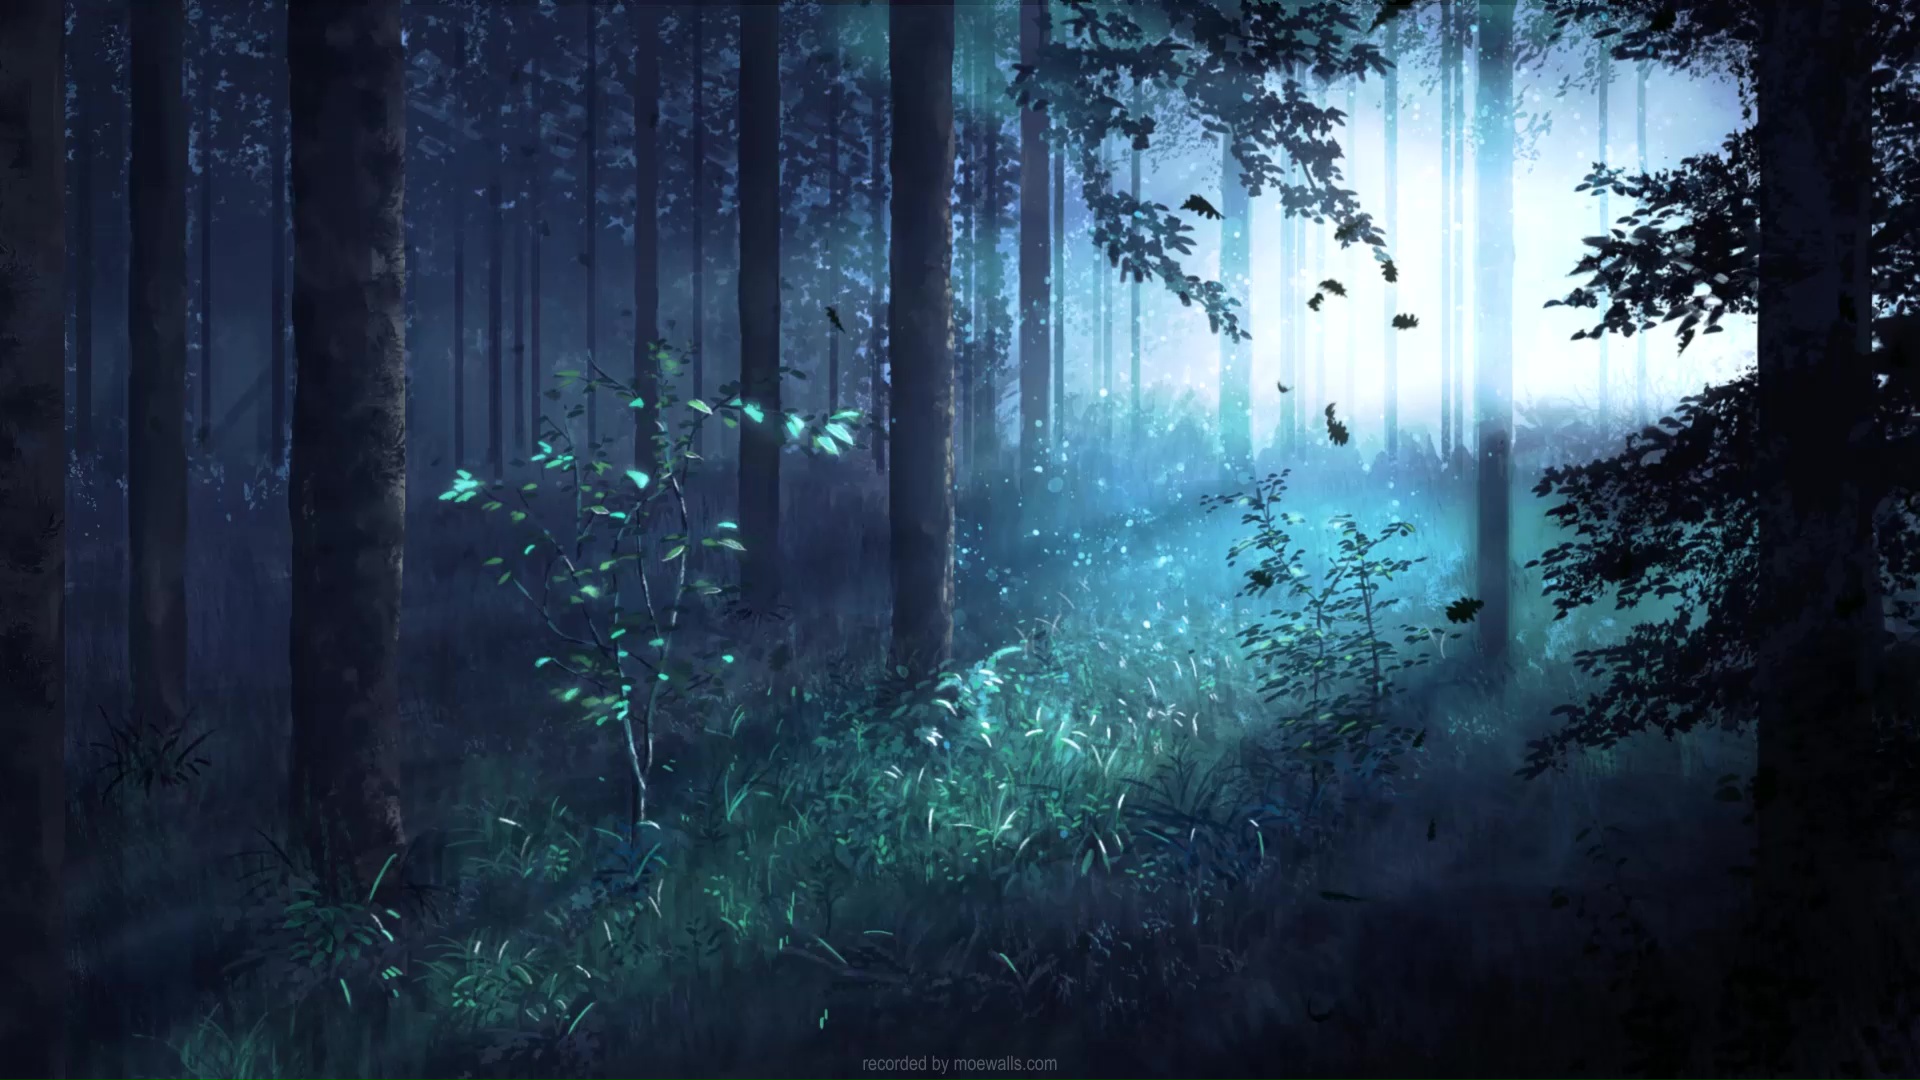 Morning In The Forest Live Wallpaper - MoeWalls